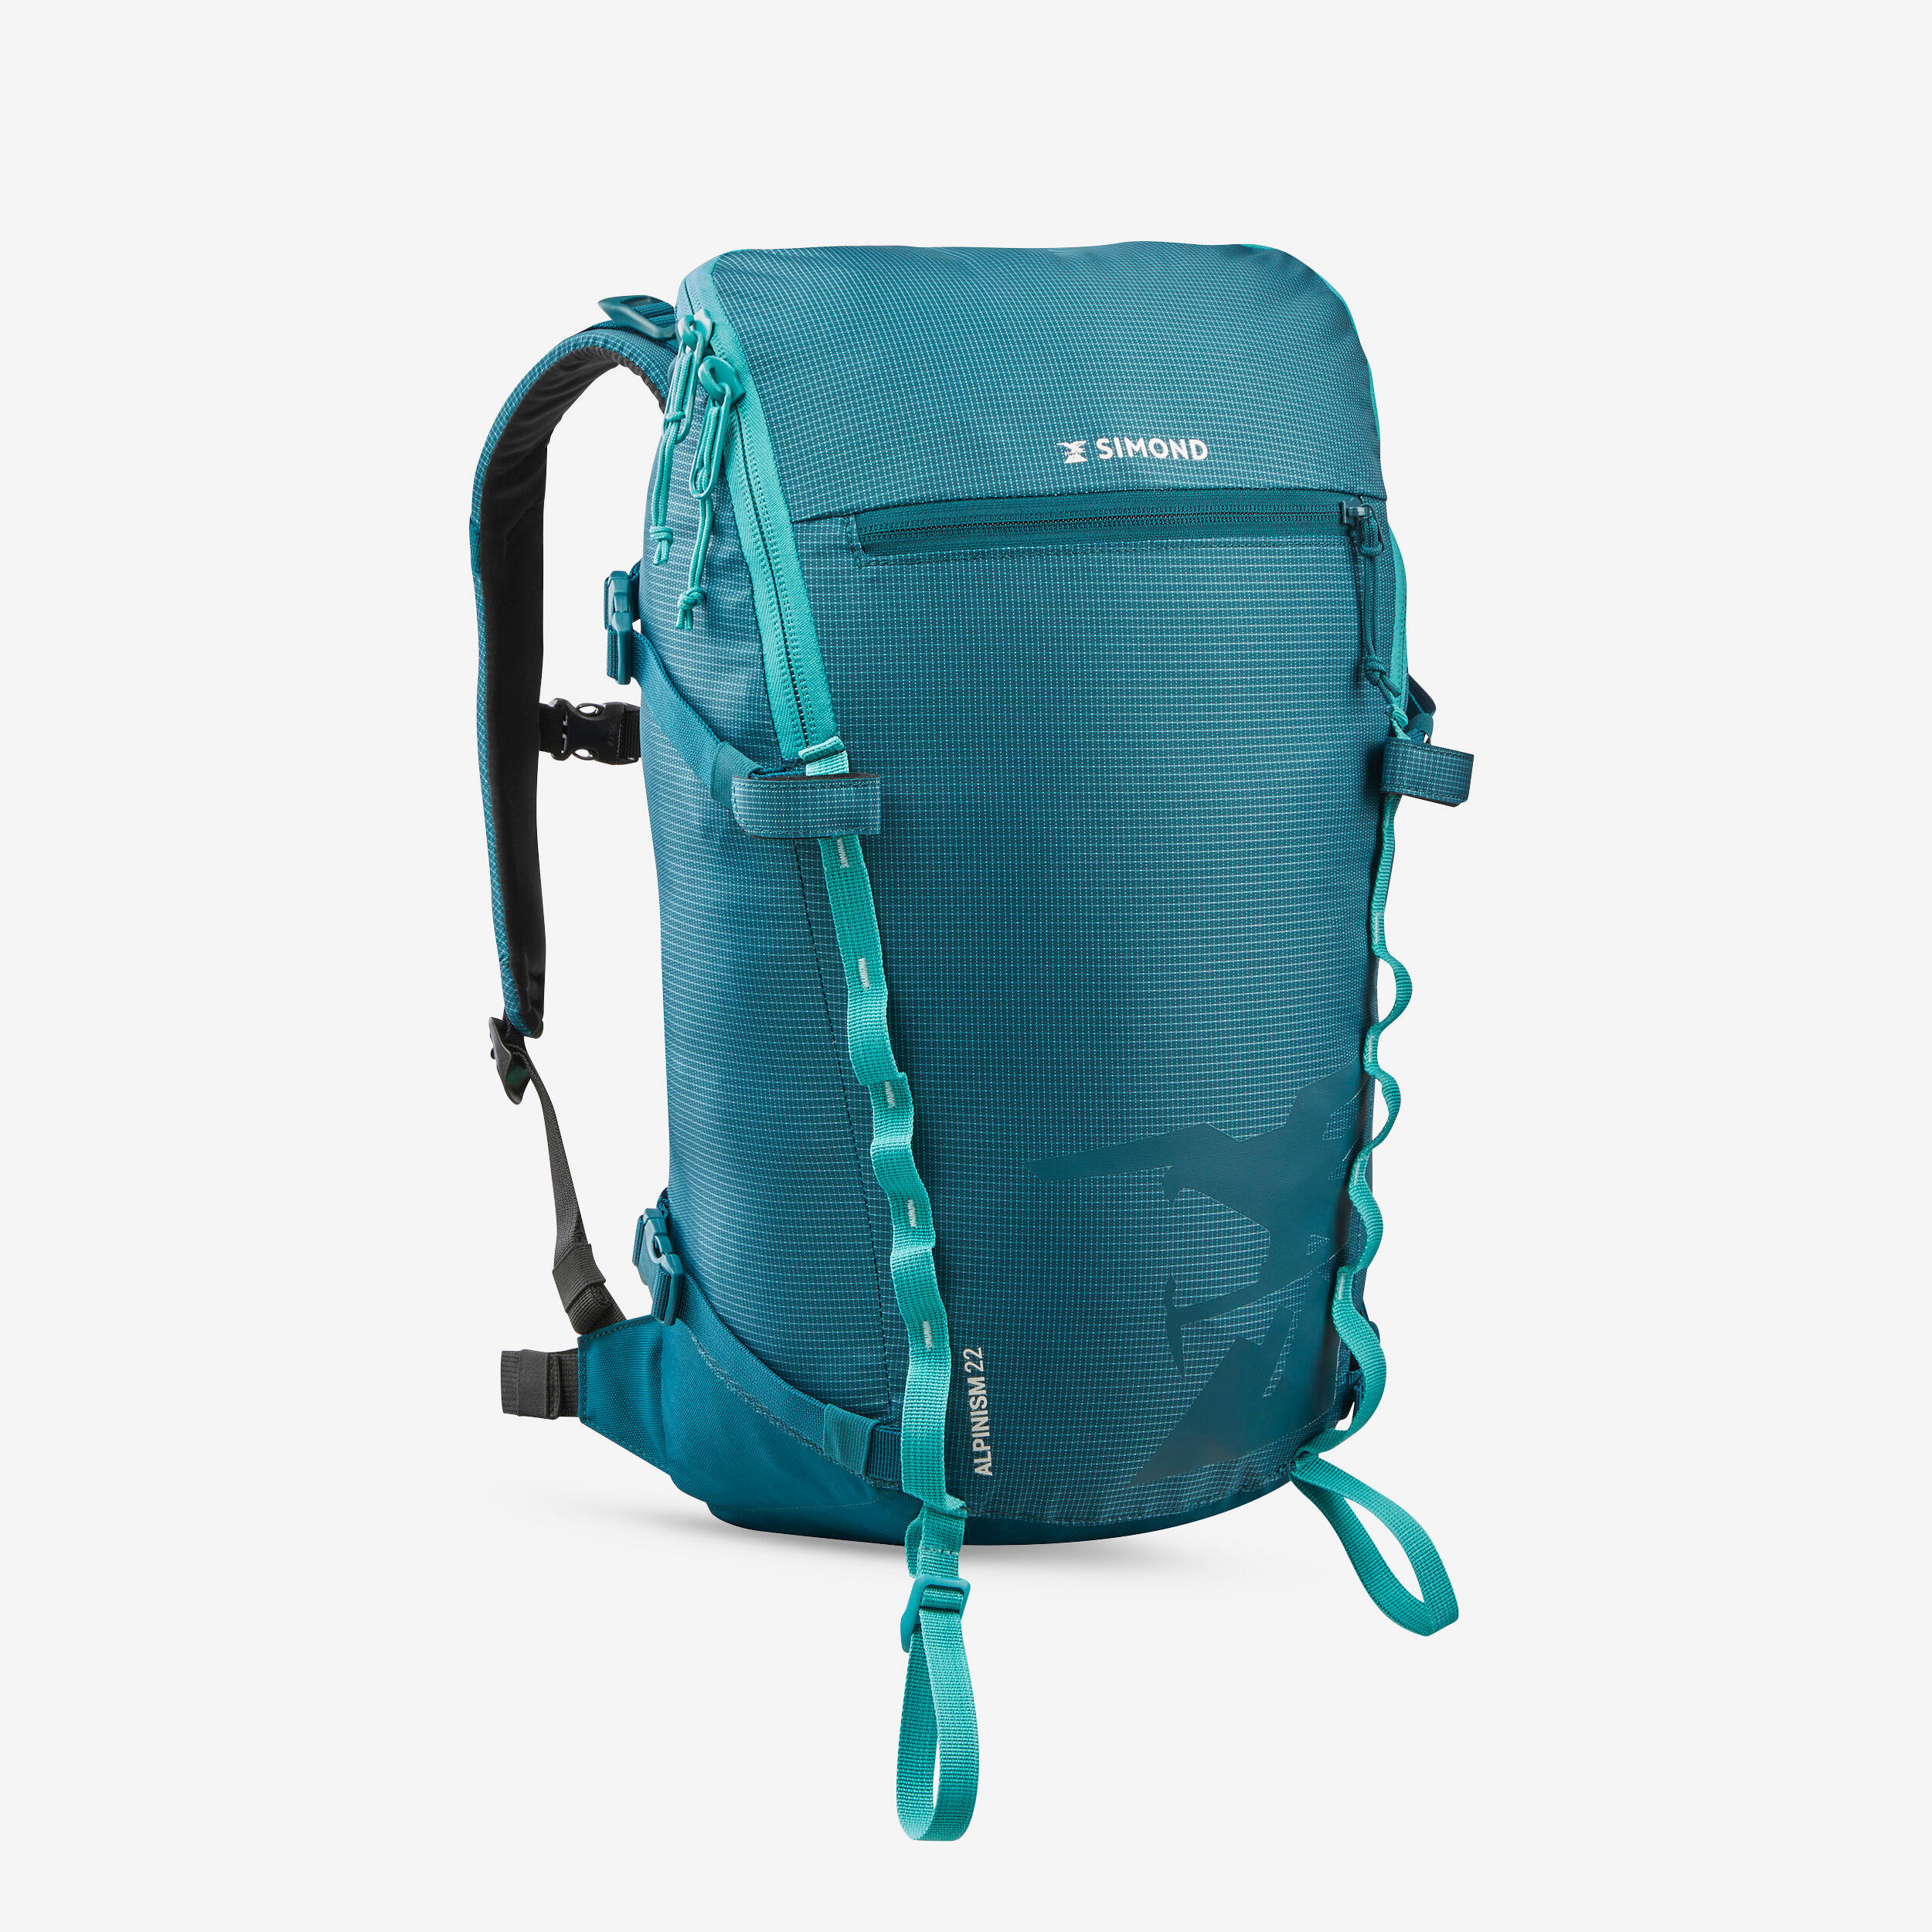 SIMOND Mountaineering backpack 22 litres - MOUNTAINEERING 22 - GREEN BLUE